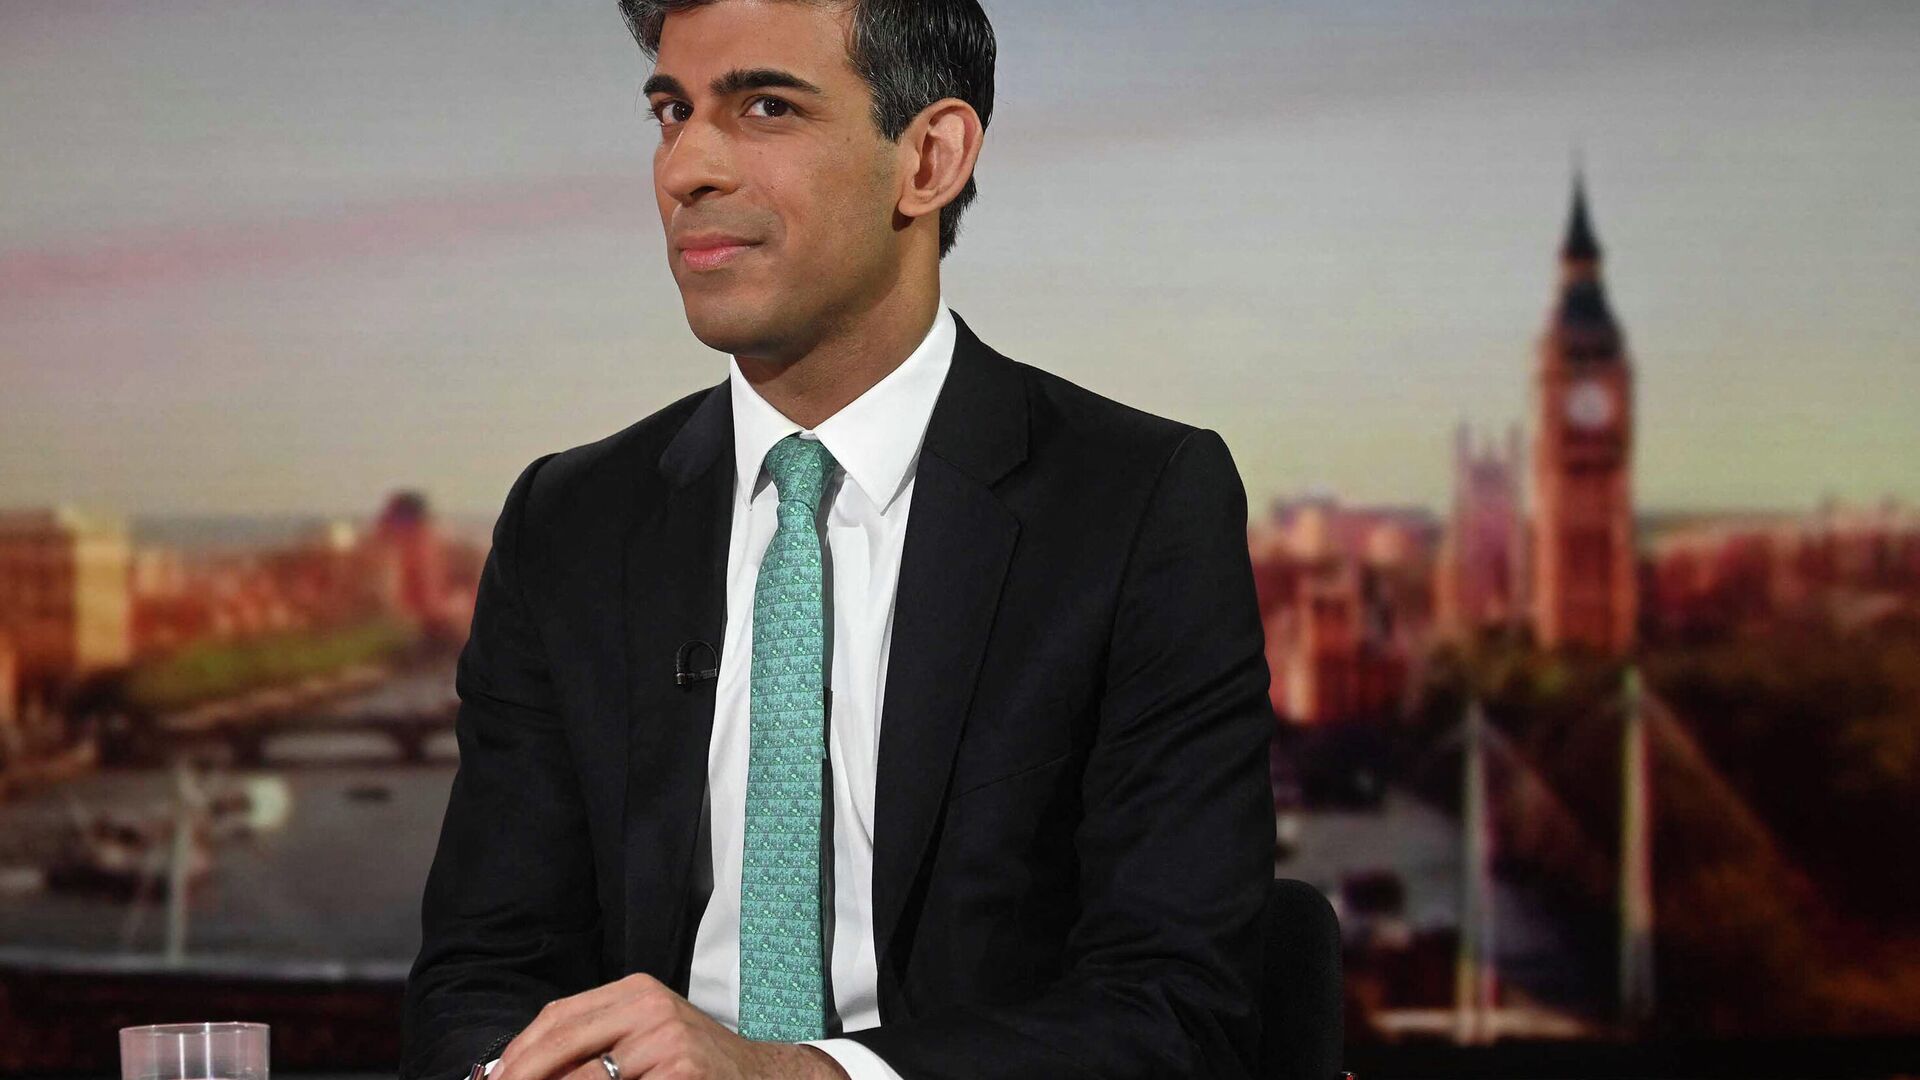 A handout picture released by the BBC, taken and received on March 20, 2022, shows Britain's Chancellor of the Exchequer Rishi Sunak appearing on the BBC's 'Sunday Morning' political television show with journalist Sophie Raworth - Sputnik International, 1920, 13.04.2022